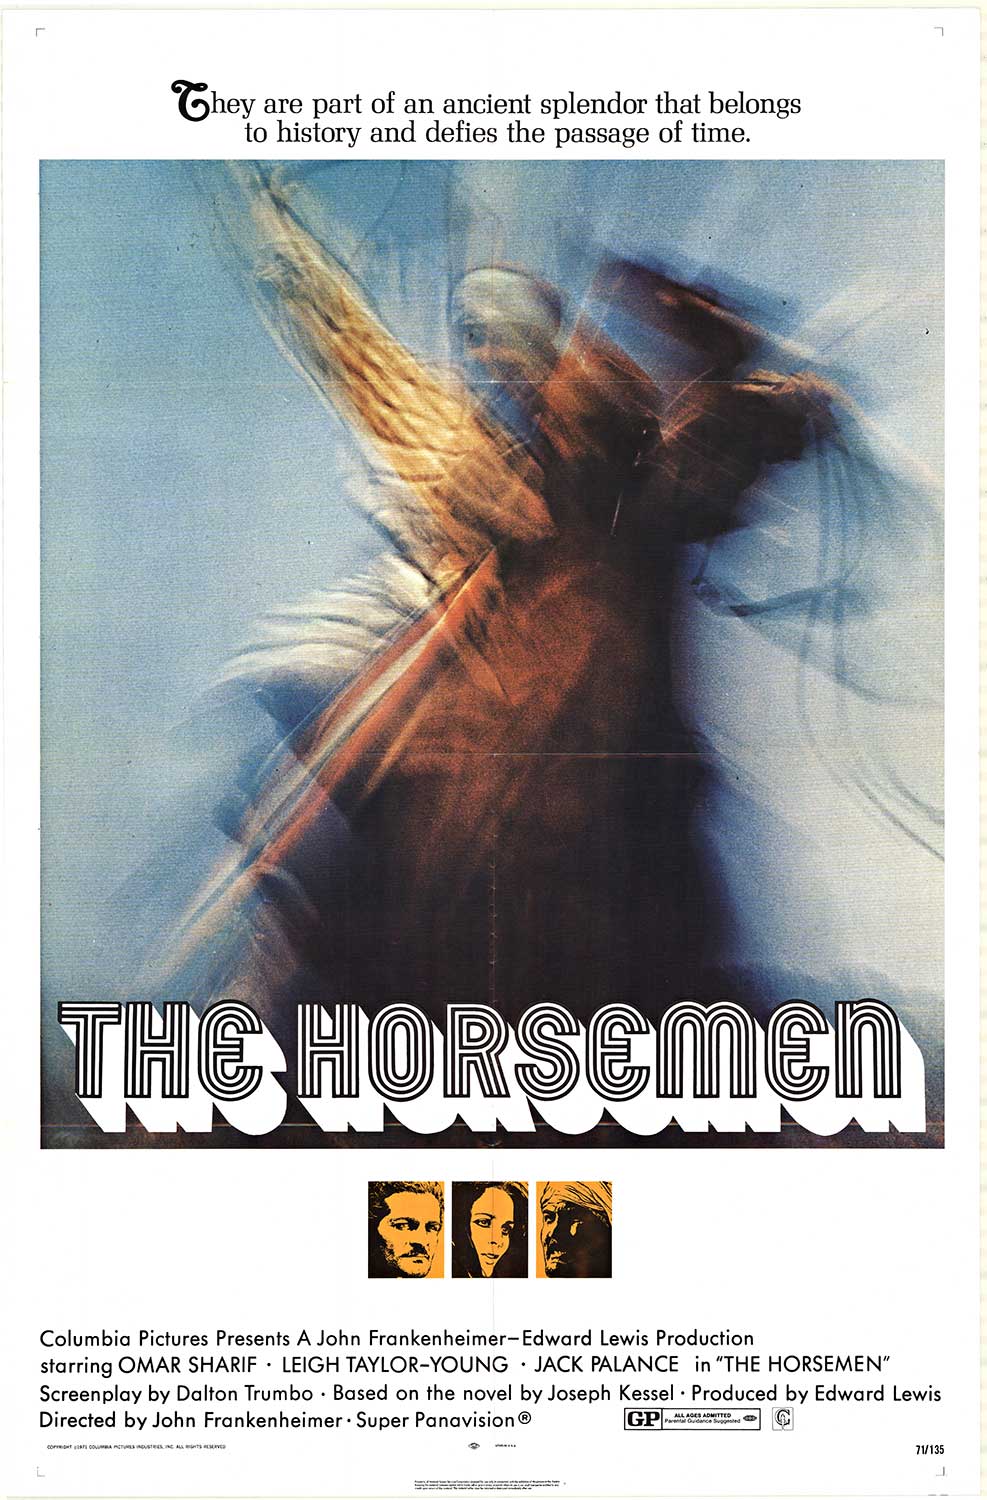 Original ‘The Horsemen’ vintage 1971 movie poster, US 1-sheet. NSS: 71/135 <br> <br>Very good condition and ready to frame. We can also help provide linen backing. Please view the large images for the high quality of this antique poster. <br> <br